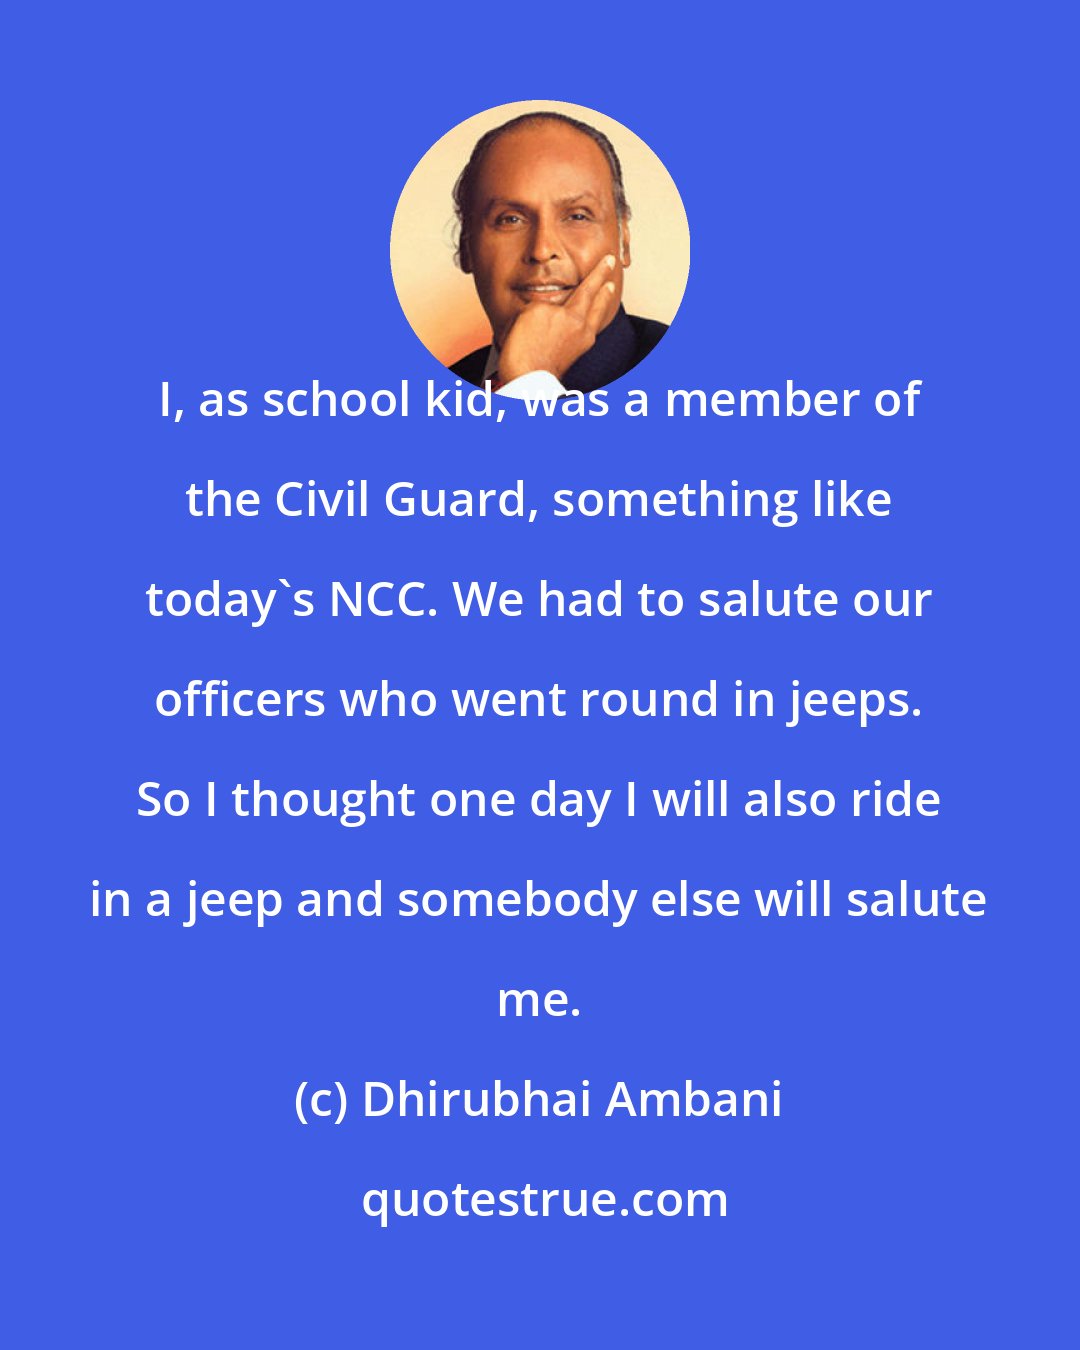 Dhirubhai Ambani: I, as school kid, was a member of the Civil Guard, something like today's NCC. We had to salute our officers who went round in jeeps. So I thought one day I will also ride in a jeep and somebody else will salute me.